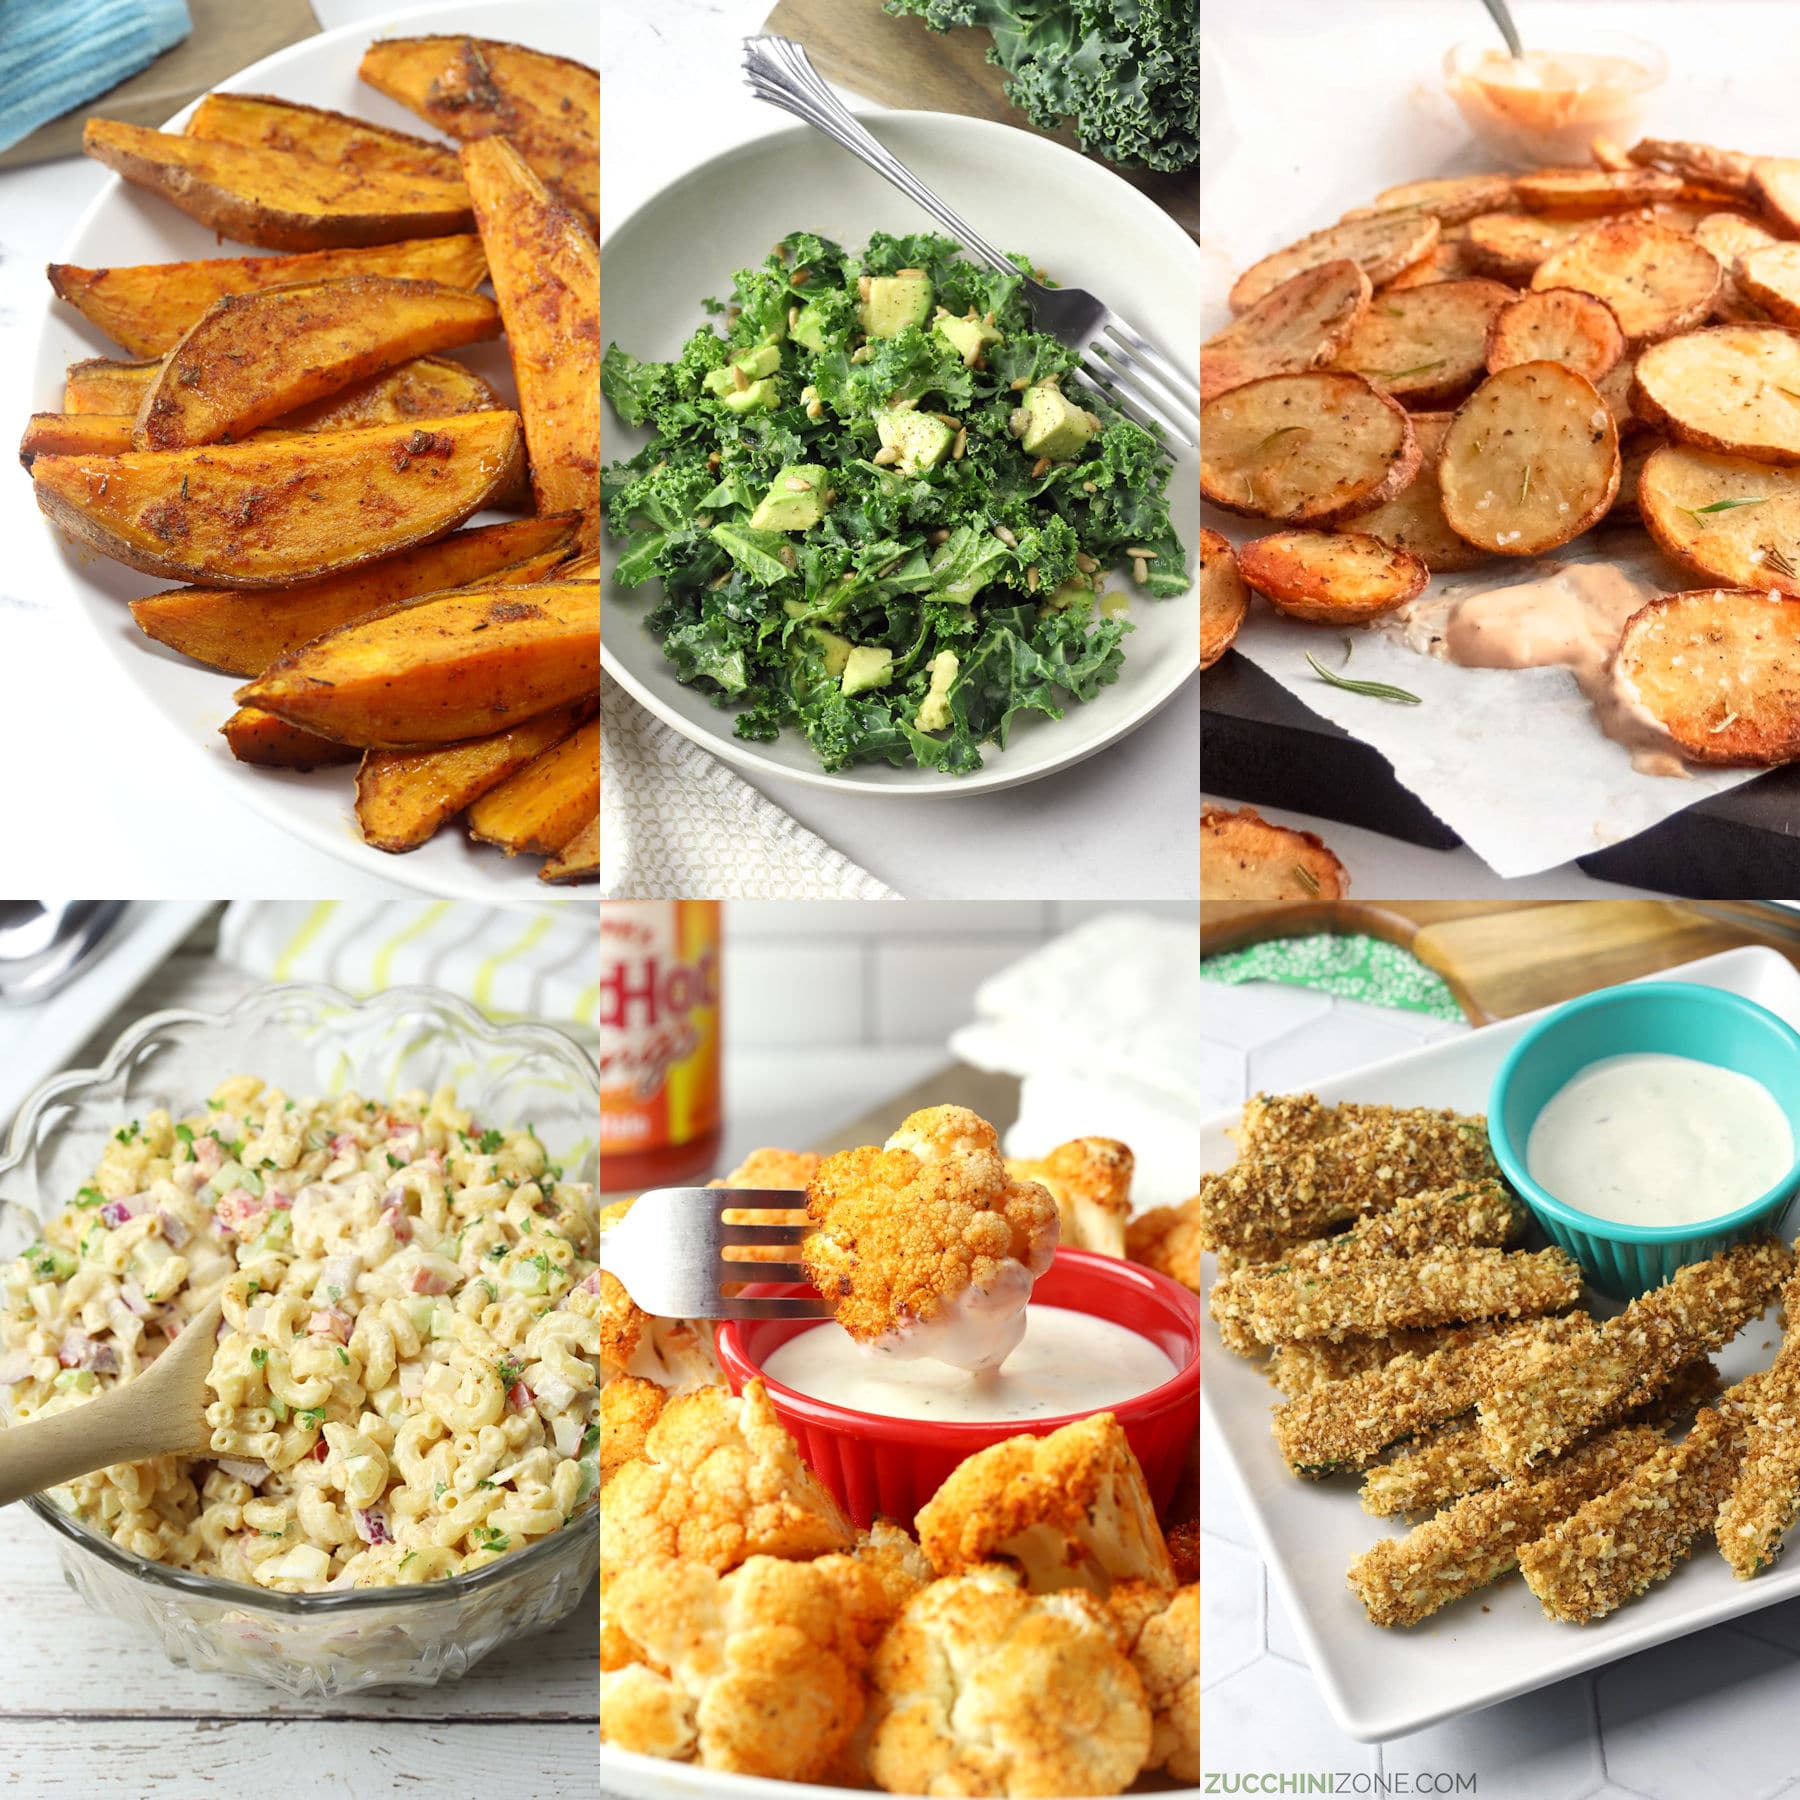 Decorative collage of side dishes to go with Philly cheesesteaks.